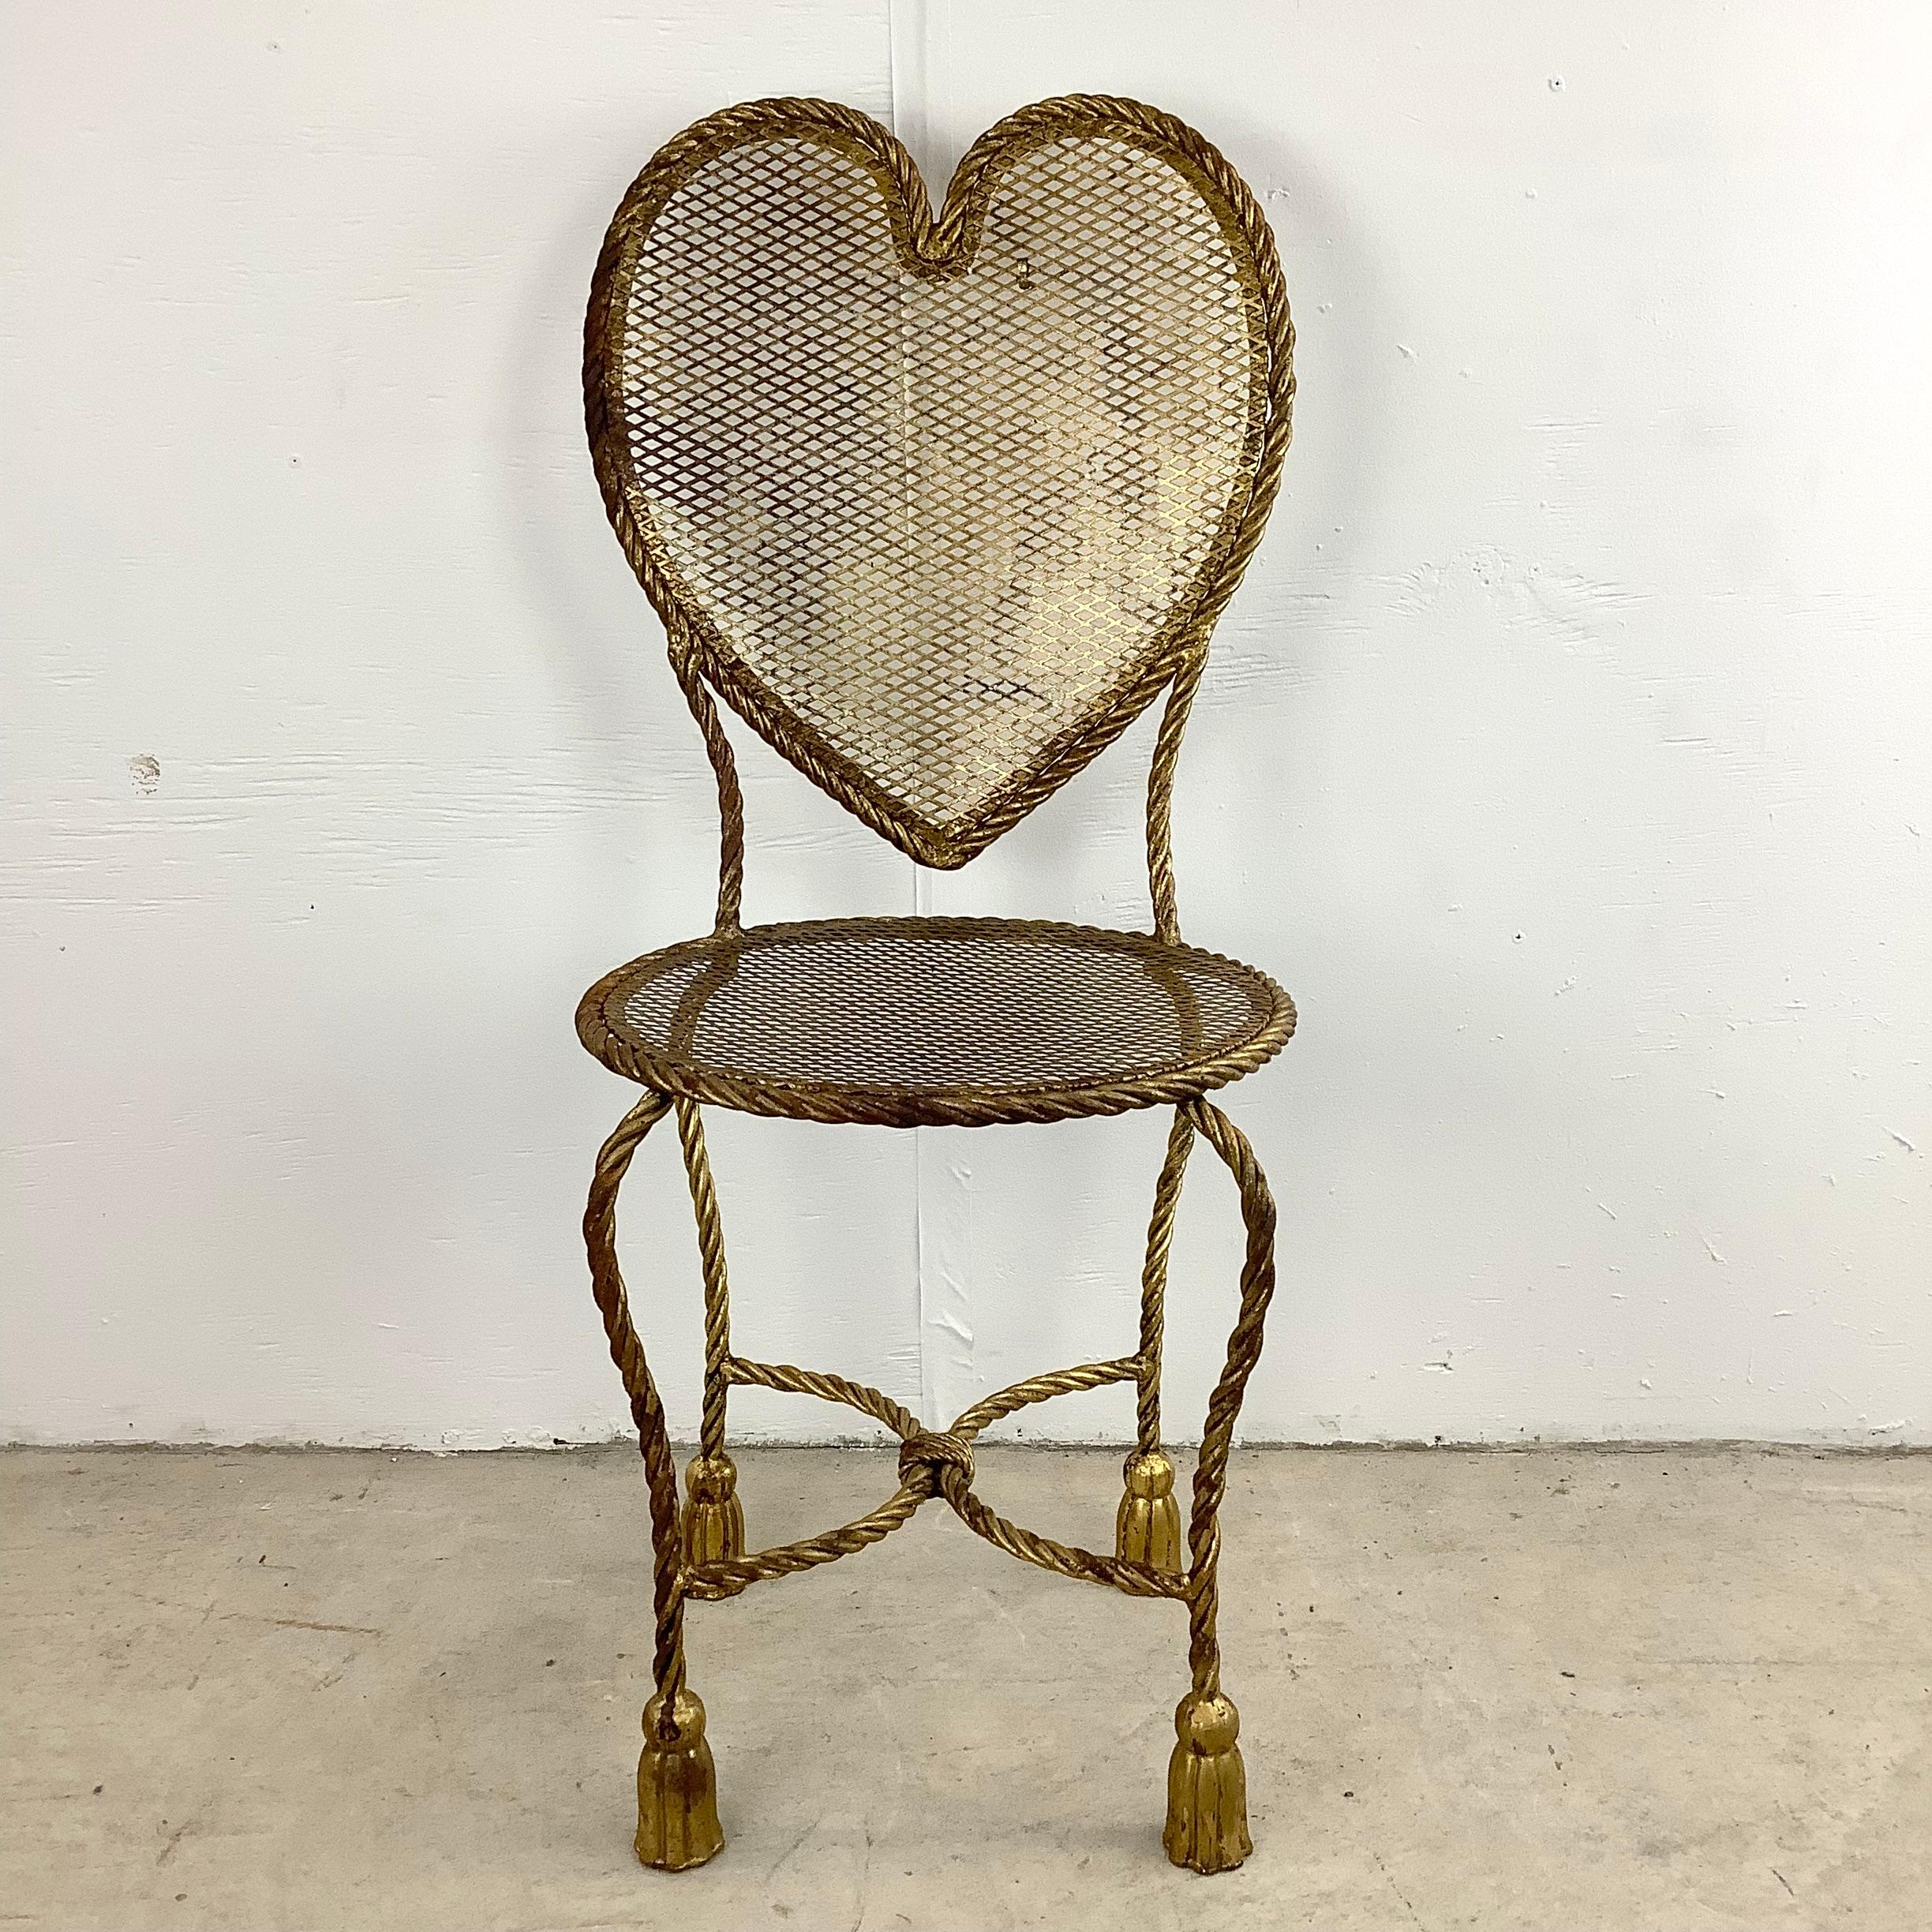 Step into a world of timeless sophistication with this exquisite Vintage Italian made Heart Chair. This chair encapsulates the essence of Italian craftsmanship and artistic finesse that has charmed connoisseurs for generations.

Indulge in the